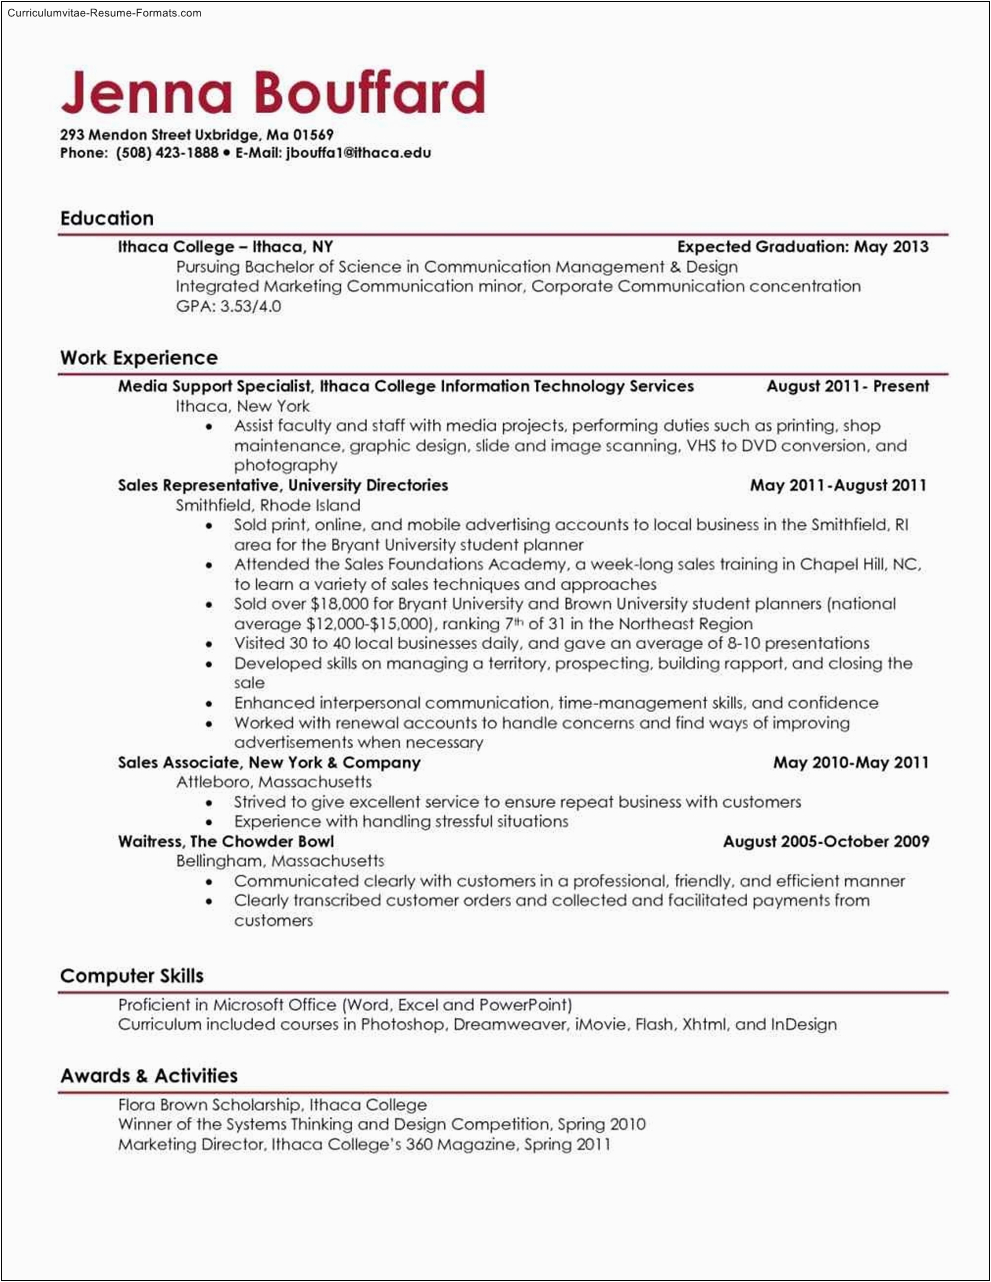 Resume Template for College Students Free Download College Resume Template Download